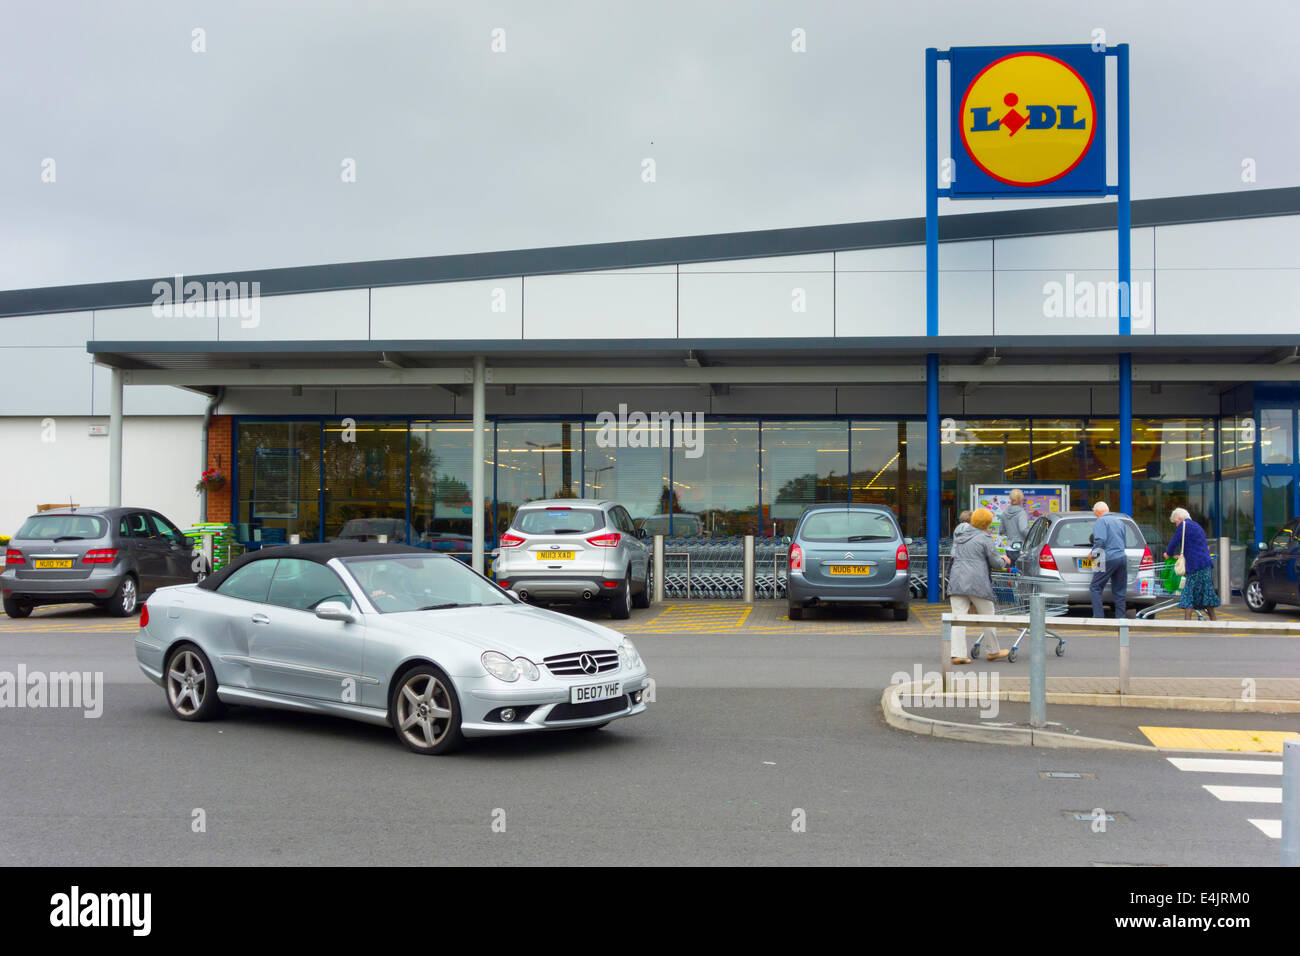 Lidl low cost supermarket attracting better off middle class customers, here one driving away in a Mercedes Benz Coupe Stock Photo